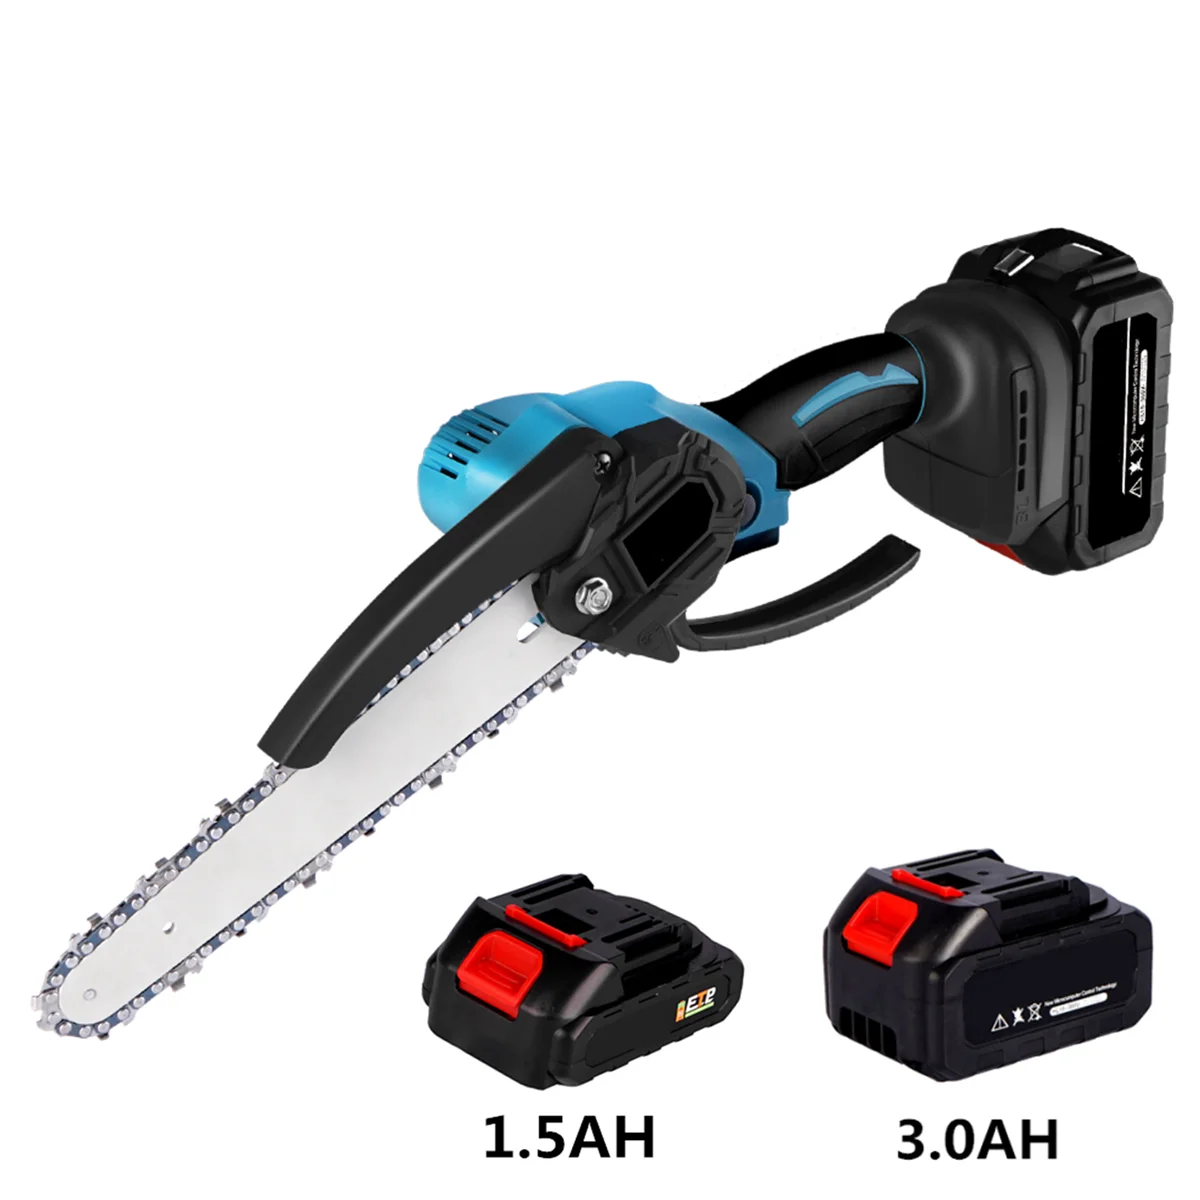 8-Inch Brushless Electric Chain Saw Cordless Chainsaw Garden Pruning Portable Wood Cutting Power Tool For Makita 18V Battery